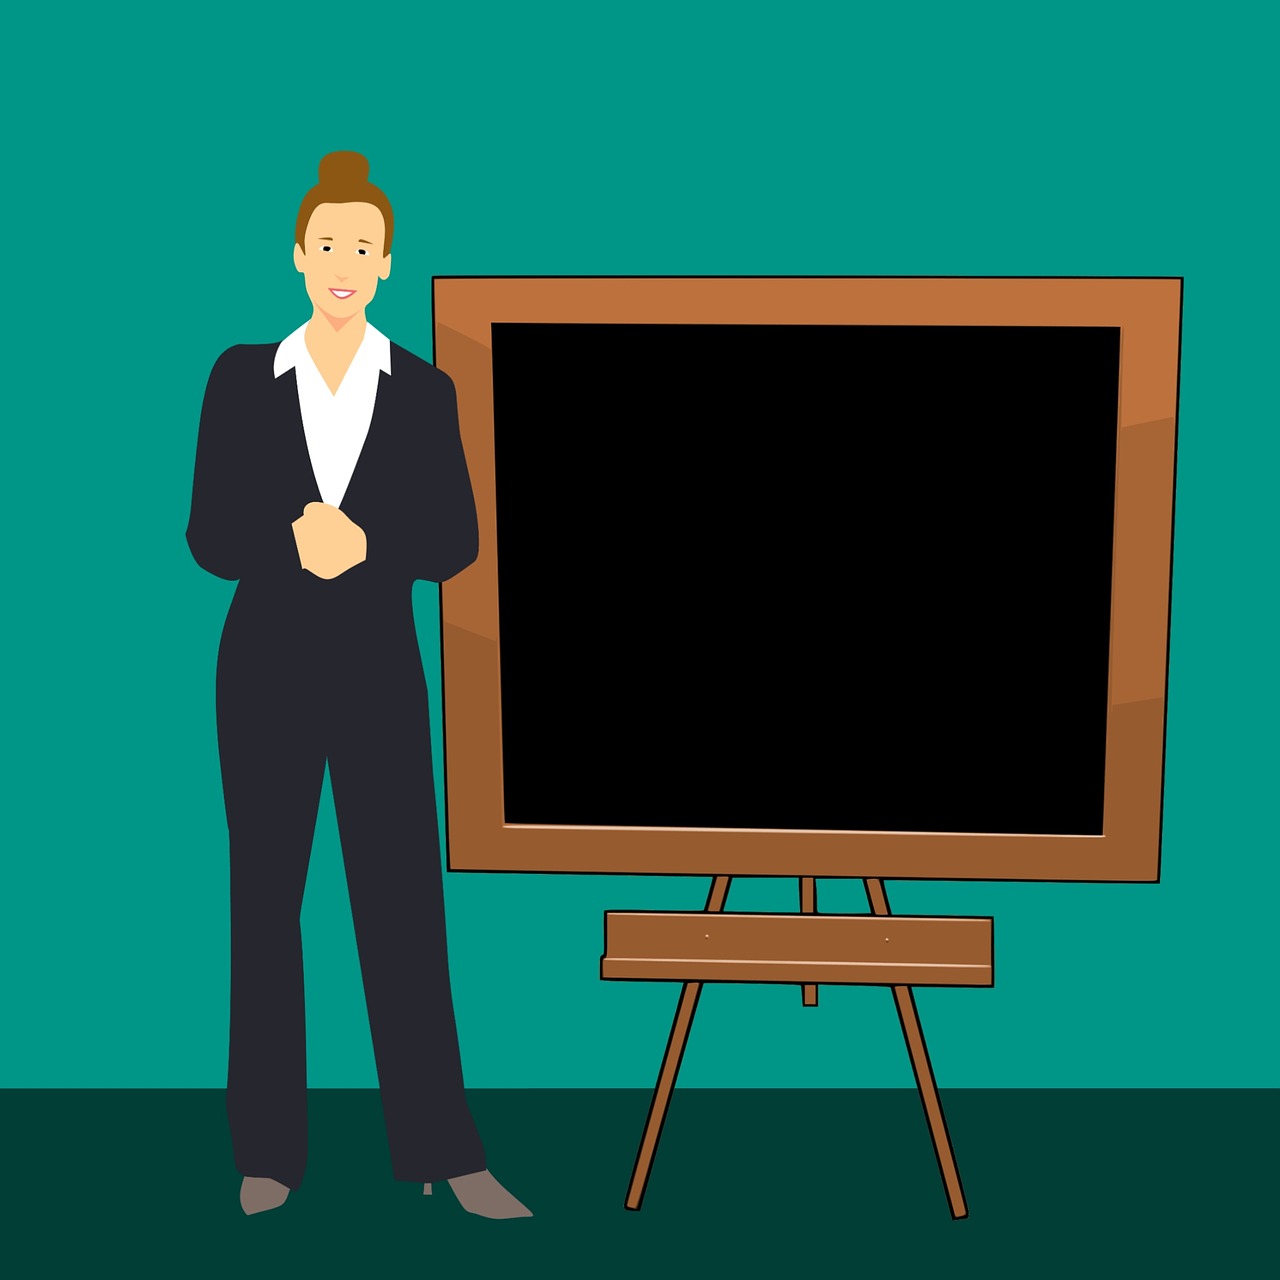 Stylized graphic of a businesswoman standing in front of a training blackboard